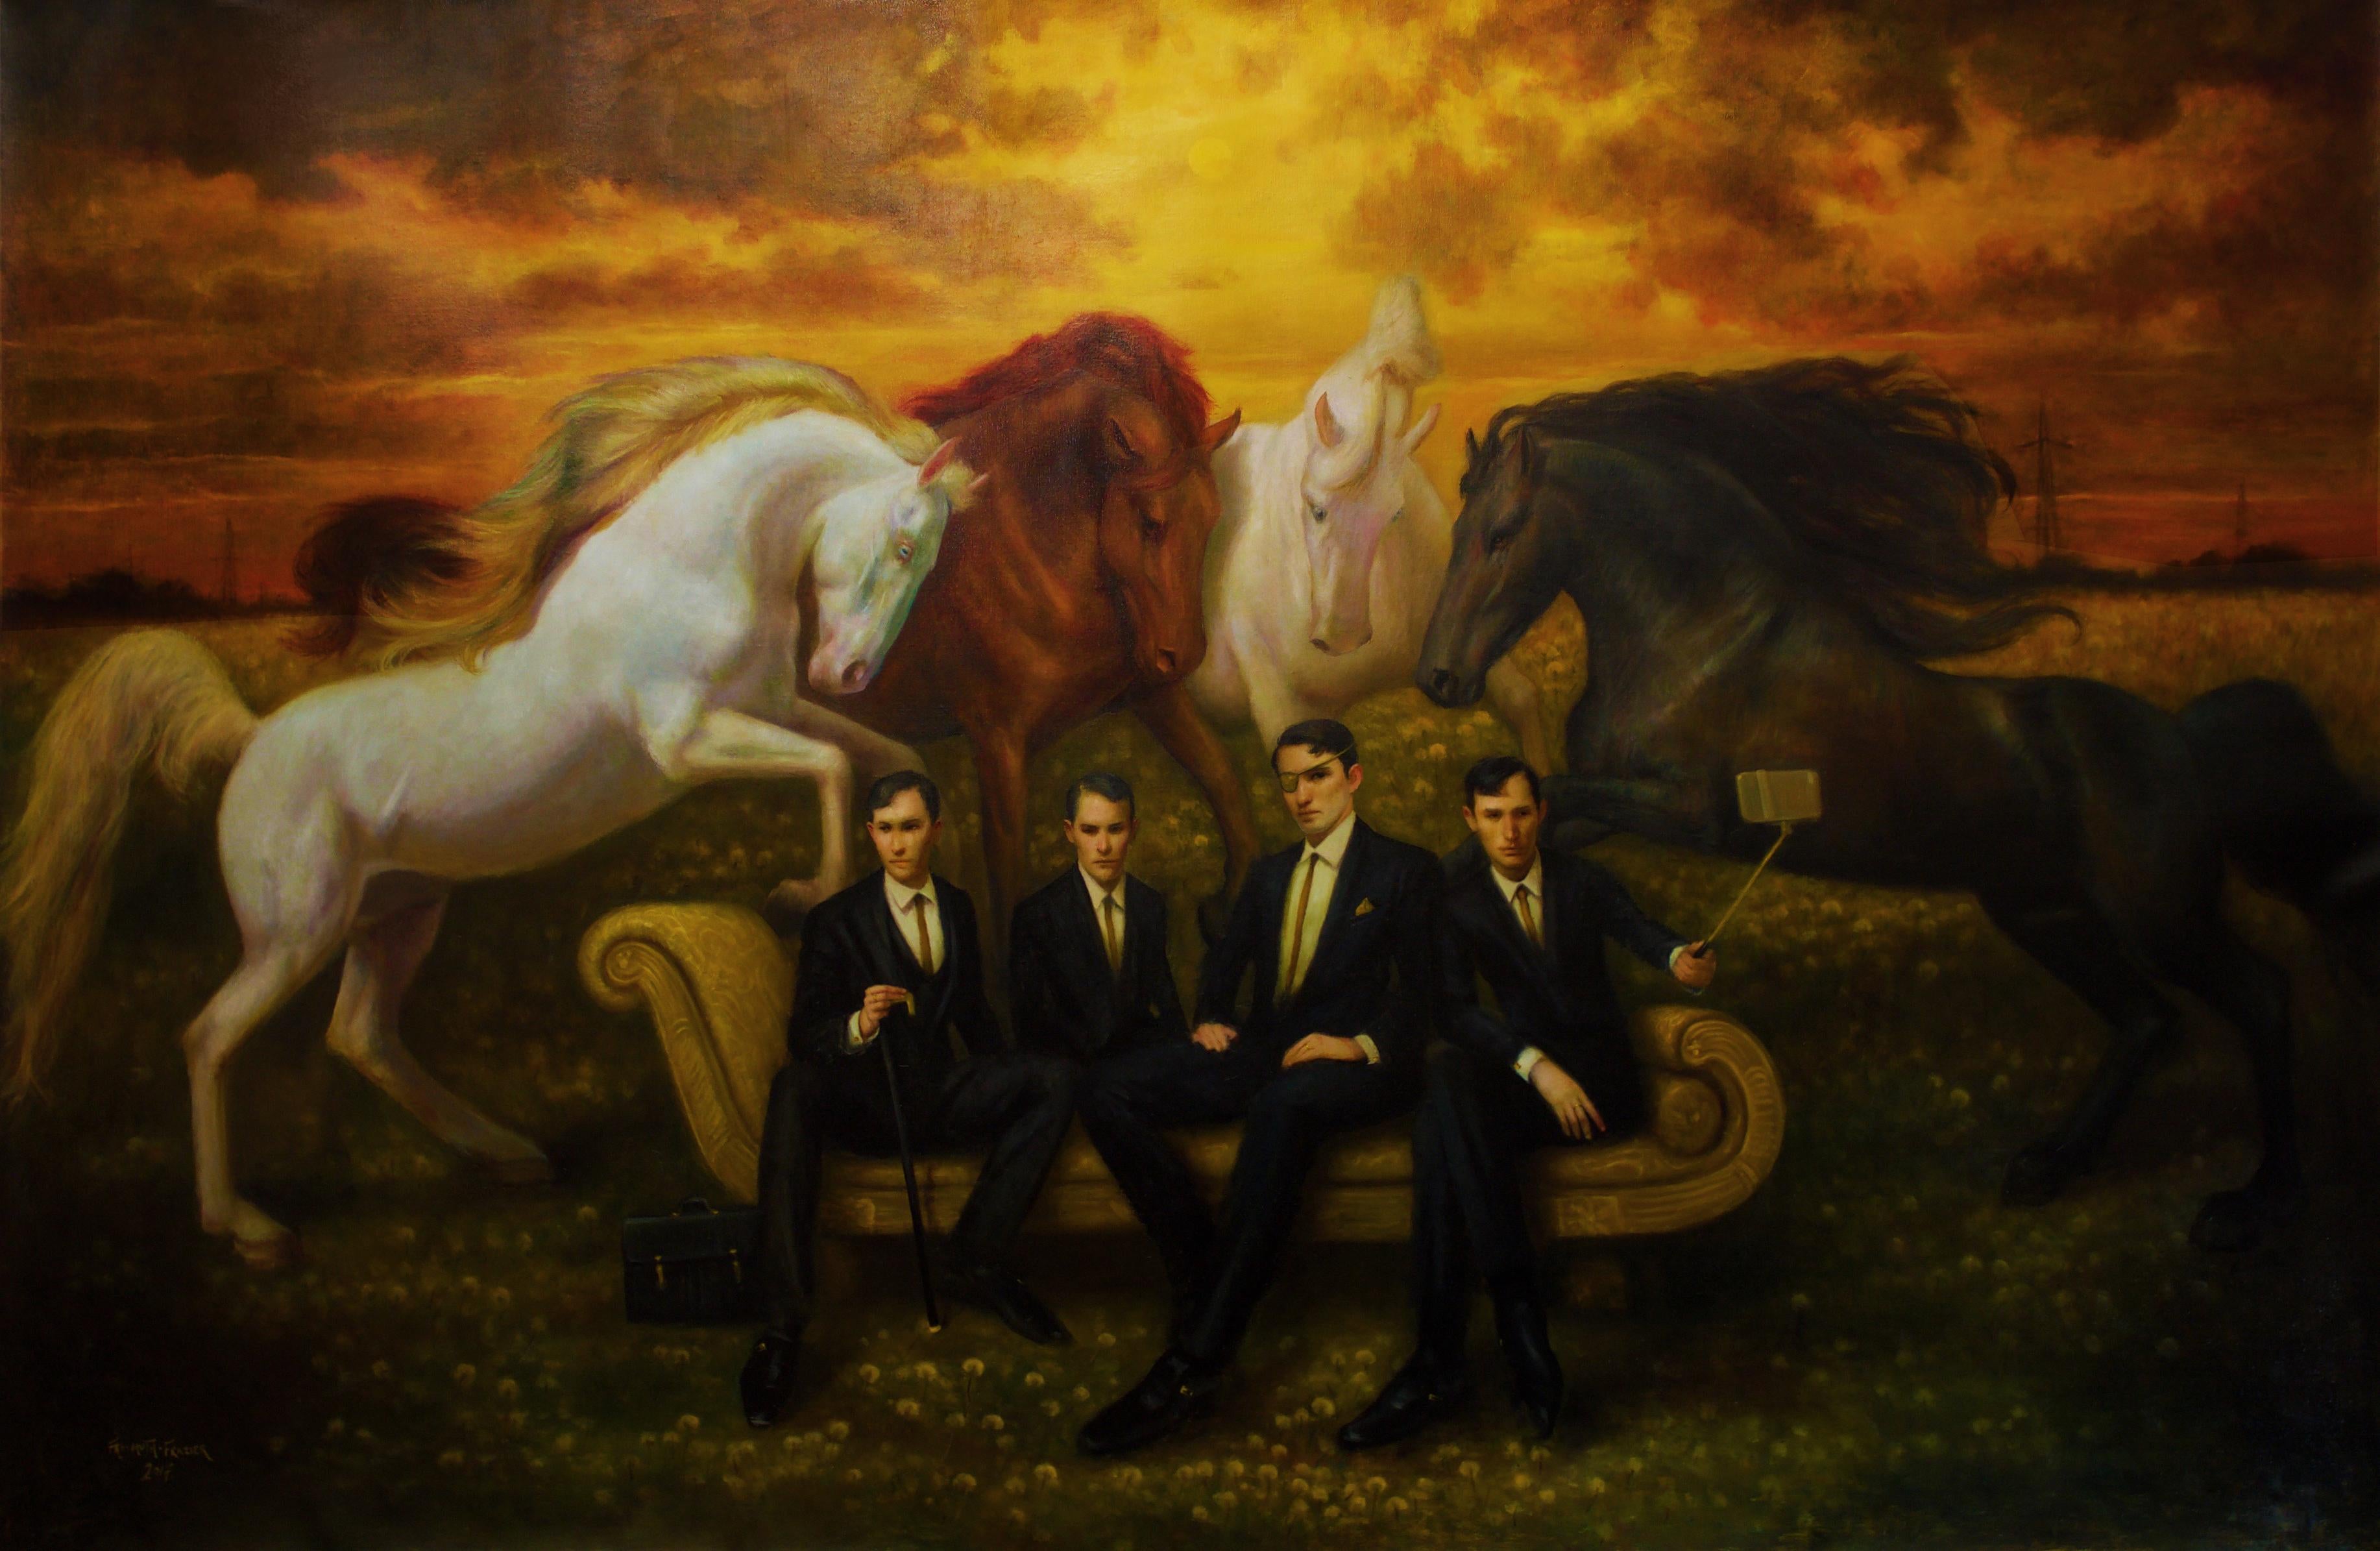 Rose Freymuth-Frazier Animal Painting - Horsemen of the Metropolis - Original Oil Painting Allegory of the Four Horsemen